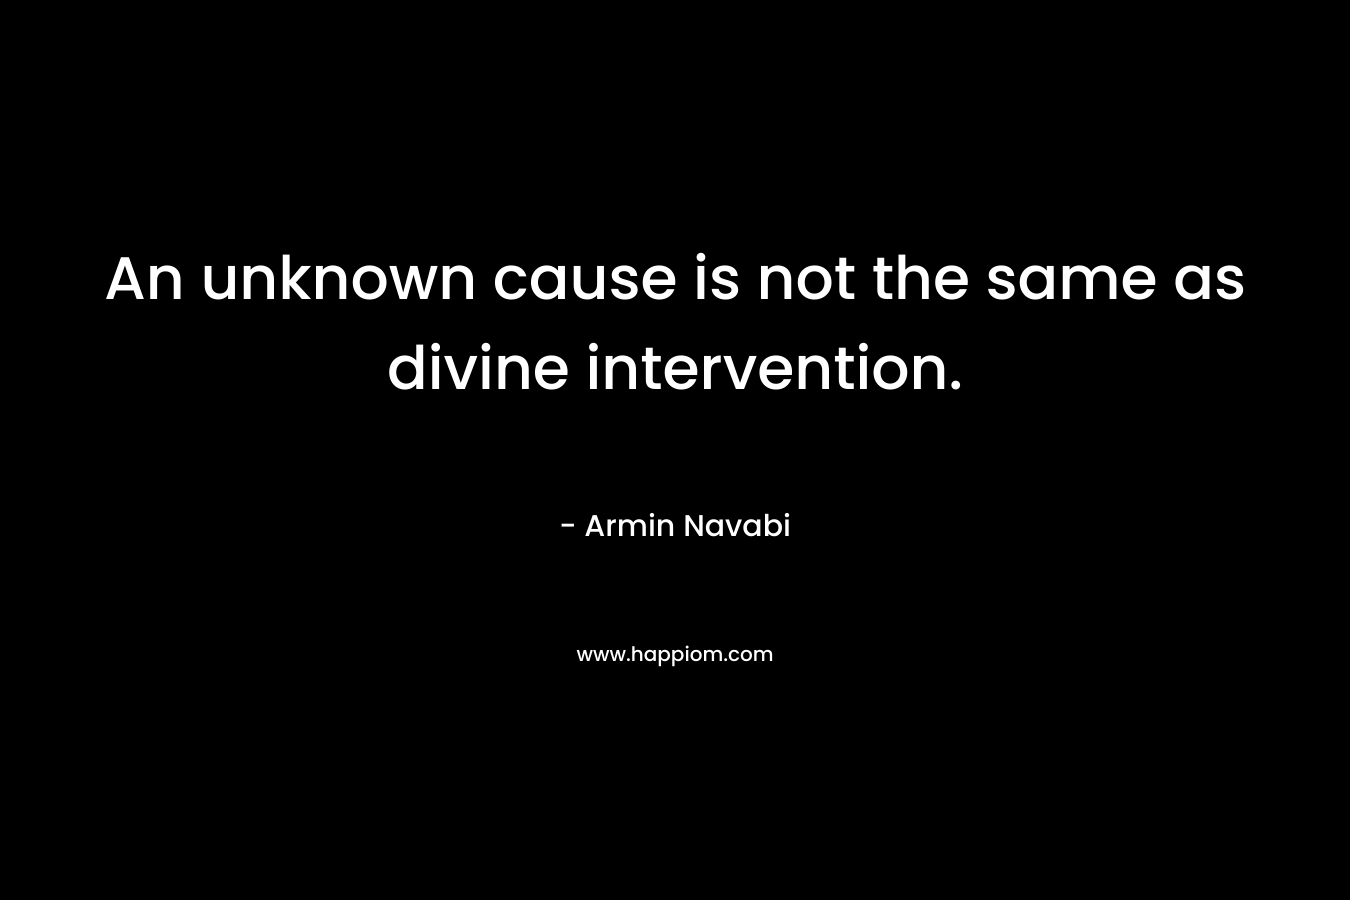 An unknown cause is not the same as divine intervention. – Armin Navabi